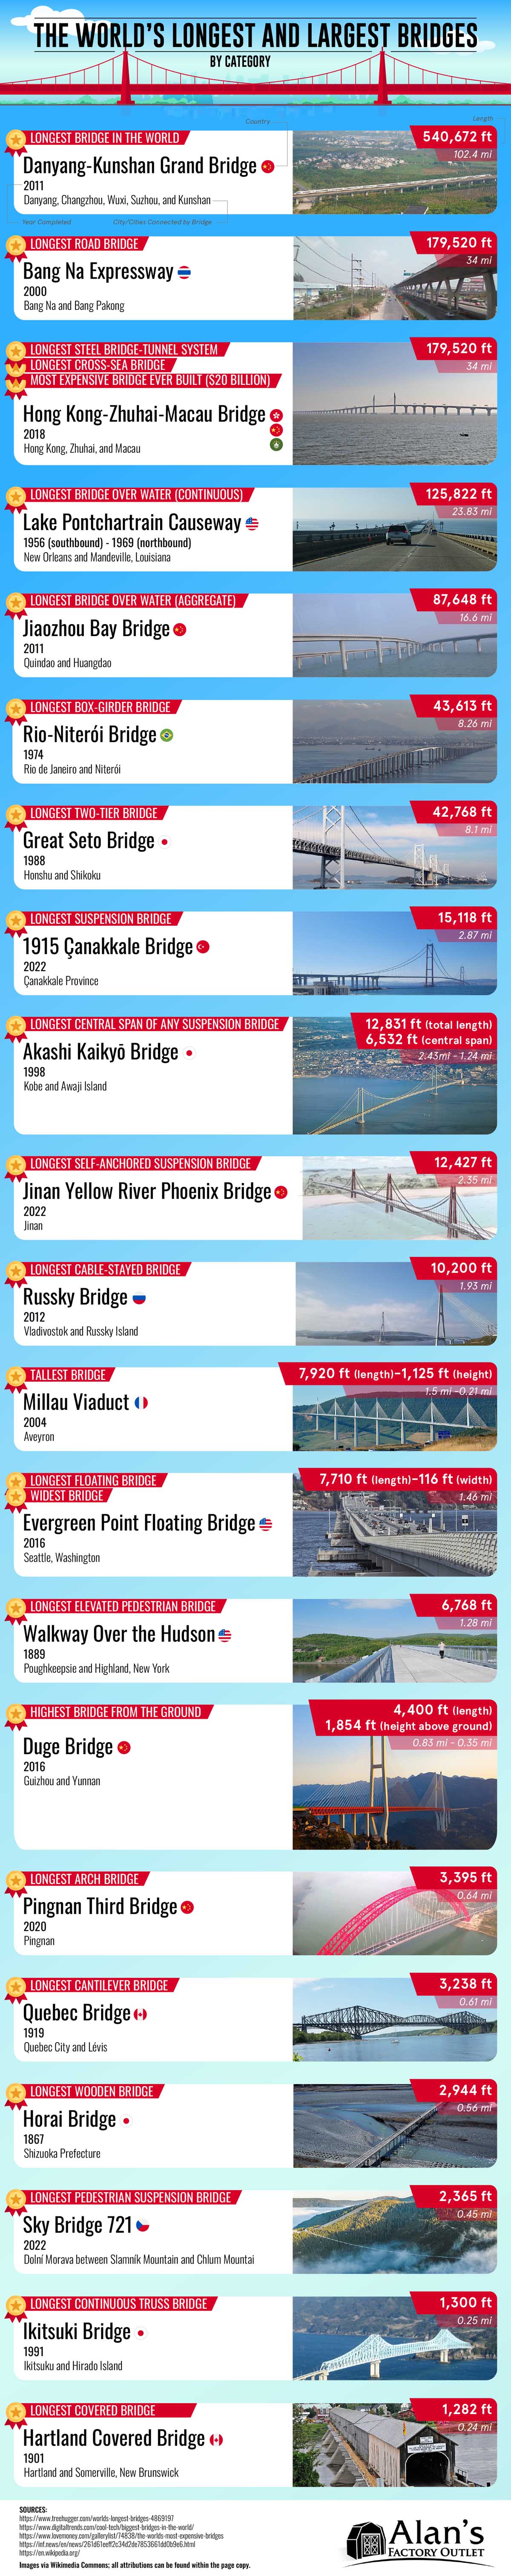 The World’s Longest and Largest Bridges by Category